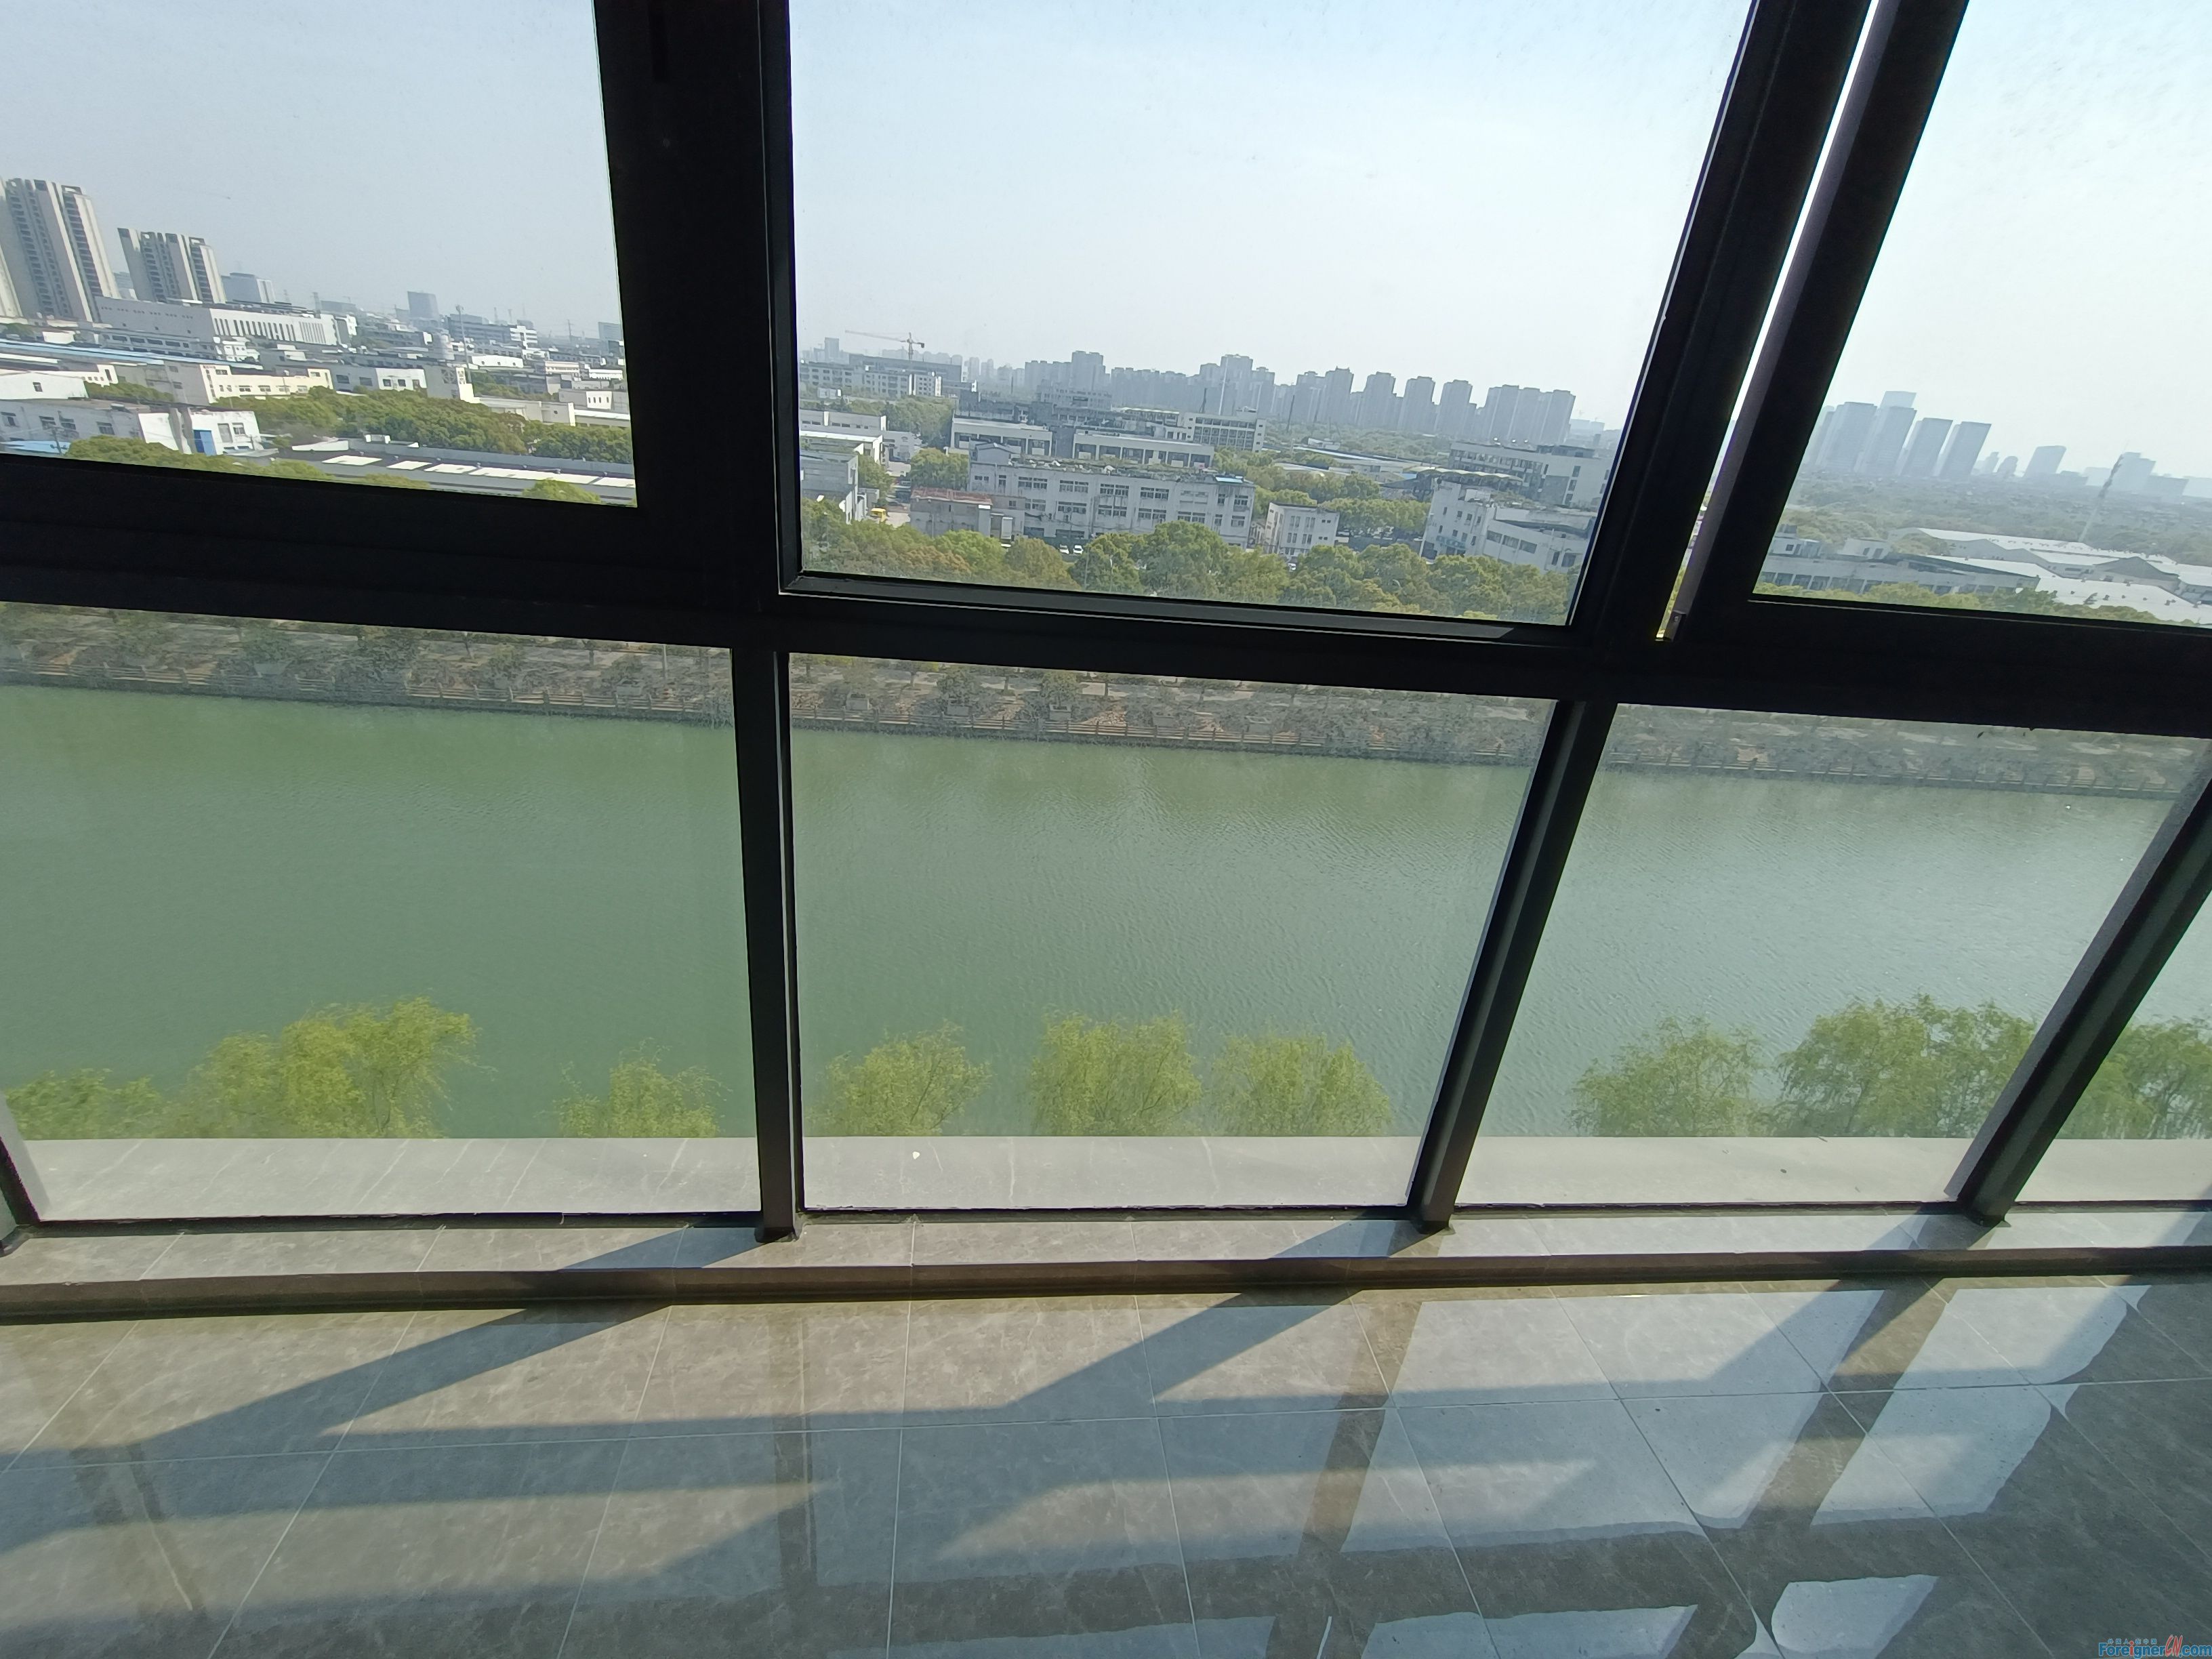   Amazing ！！Suzhou rental Bravura apartment for expats/ 4 bedrooms and 2 bathrooms/lots of sunlight/ open Balcony/ Olympic Center/ subway line 5 Nearby/ in SIP.